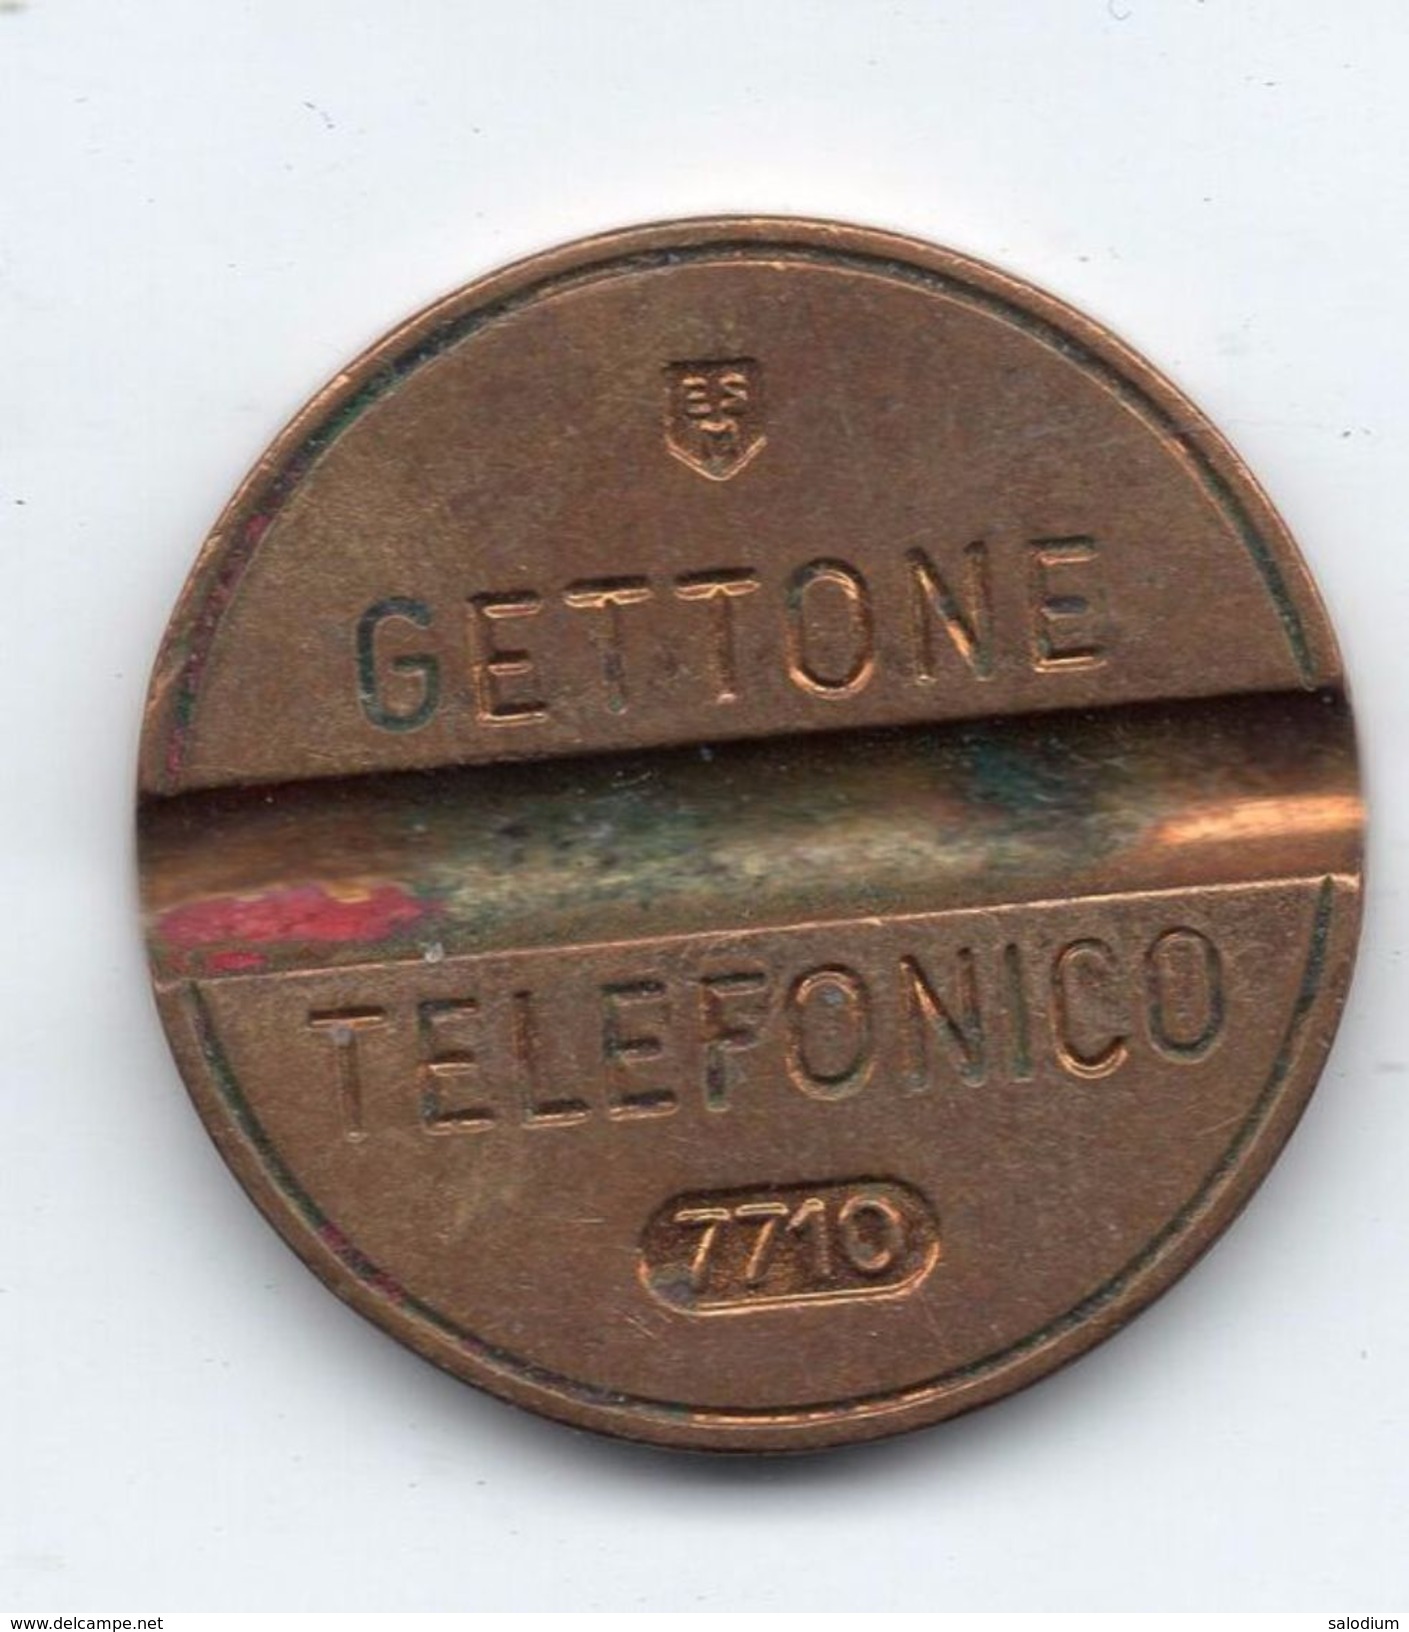 Gettone Telefonico 7710 Token Telephone - (Id-782) - Professionals/Firms